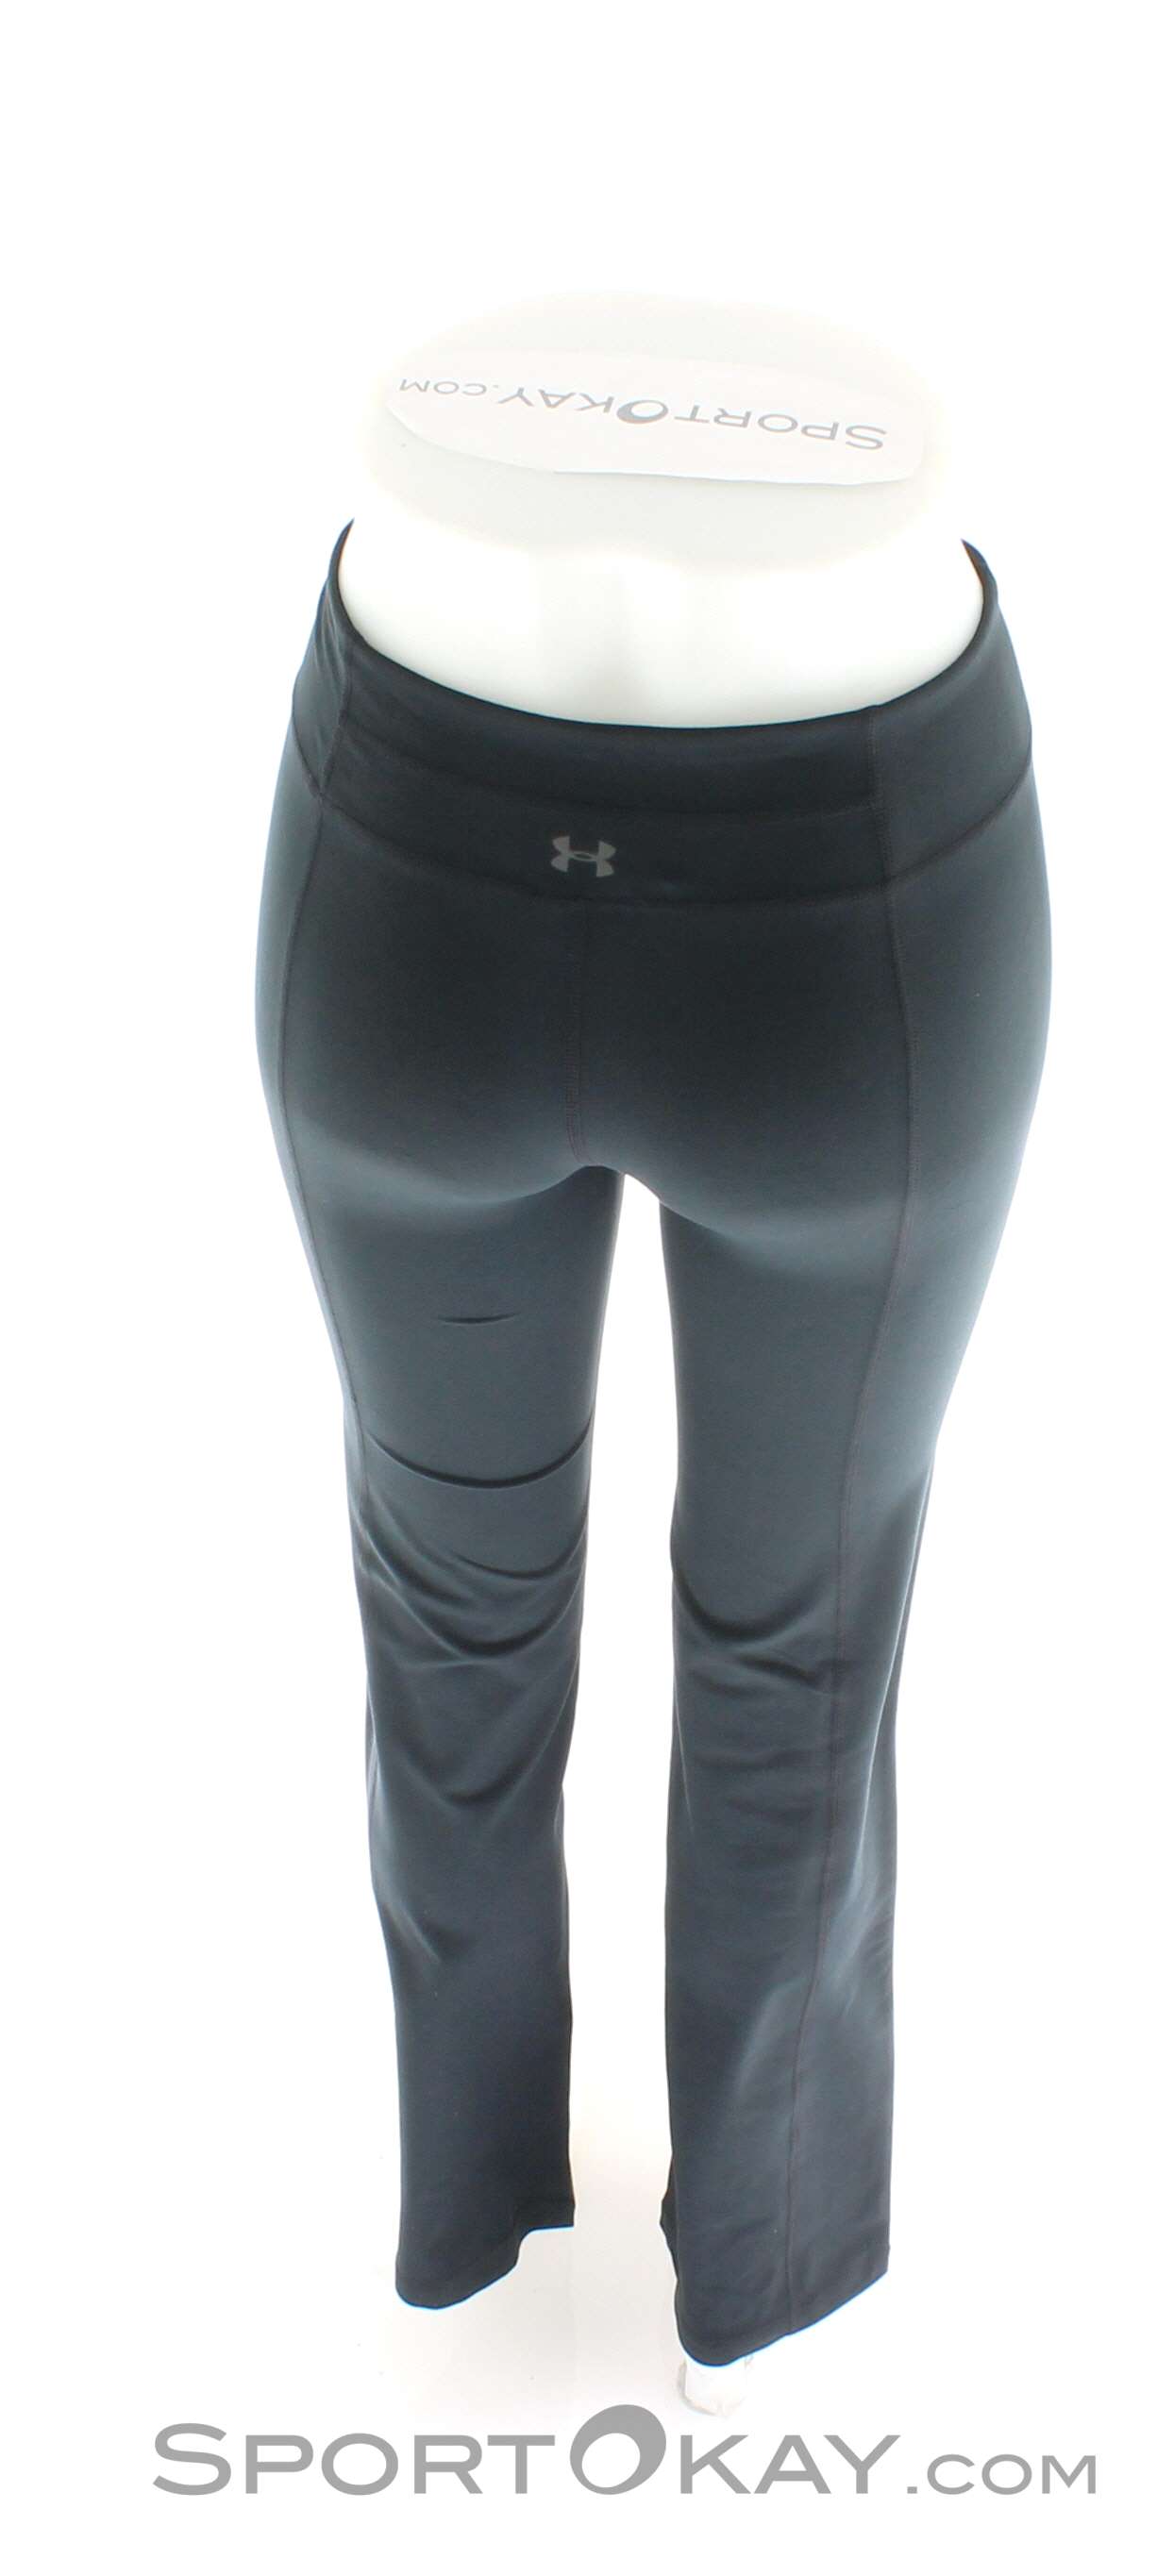 Under Armour Perfect Pant Fitted Womens Fitness Pants - Pants